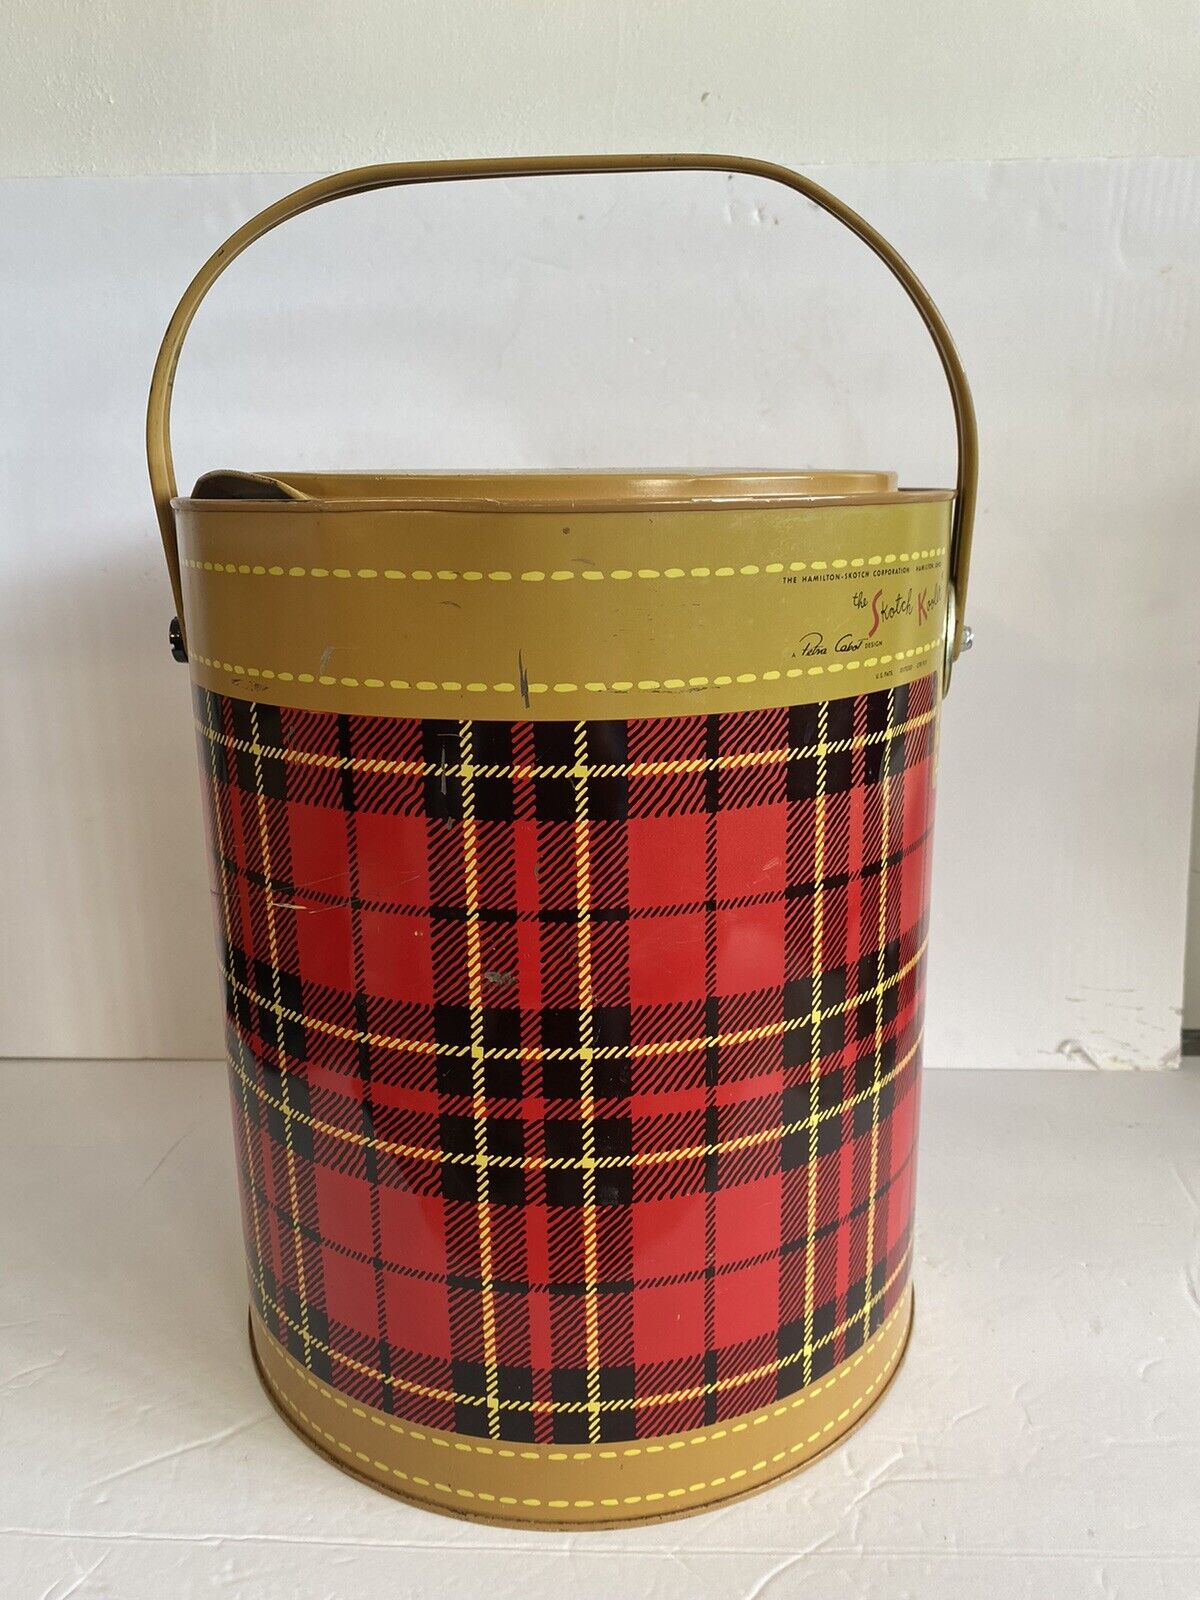 Vintage The Skotch Kooler 4 Gallon Deluxe By Hamilton Scotch Corp Red Plaid